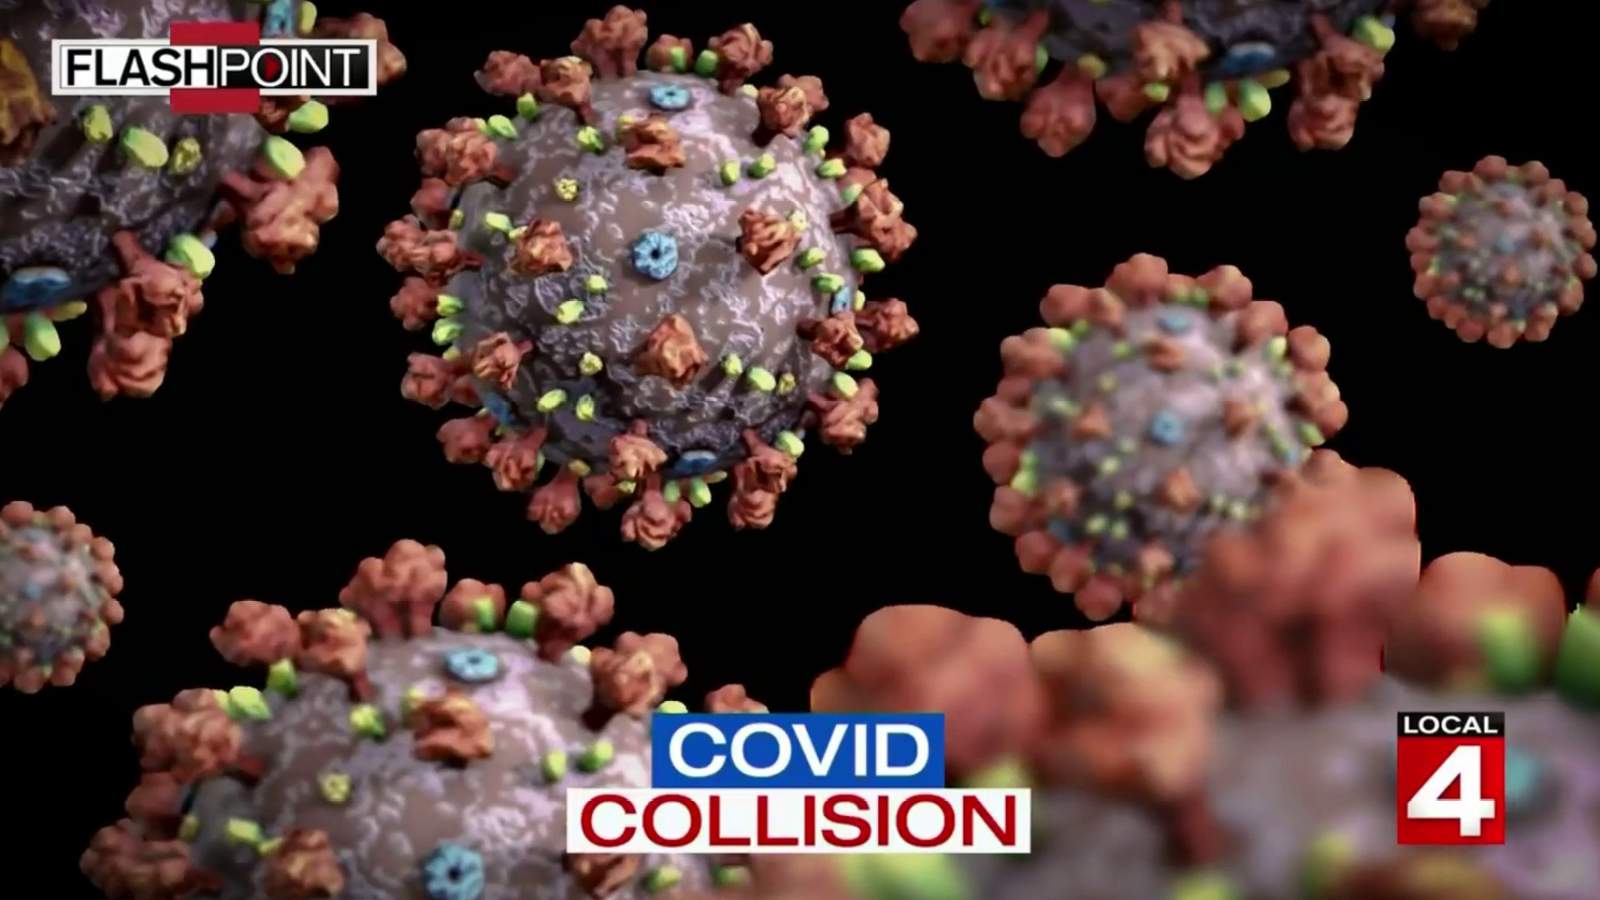 Flashpoint 10/25/20: With governor’s powers deflated, is Michigan ready for second coronavirus wave?